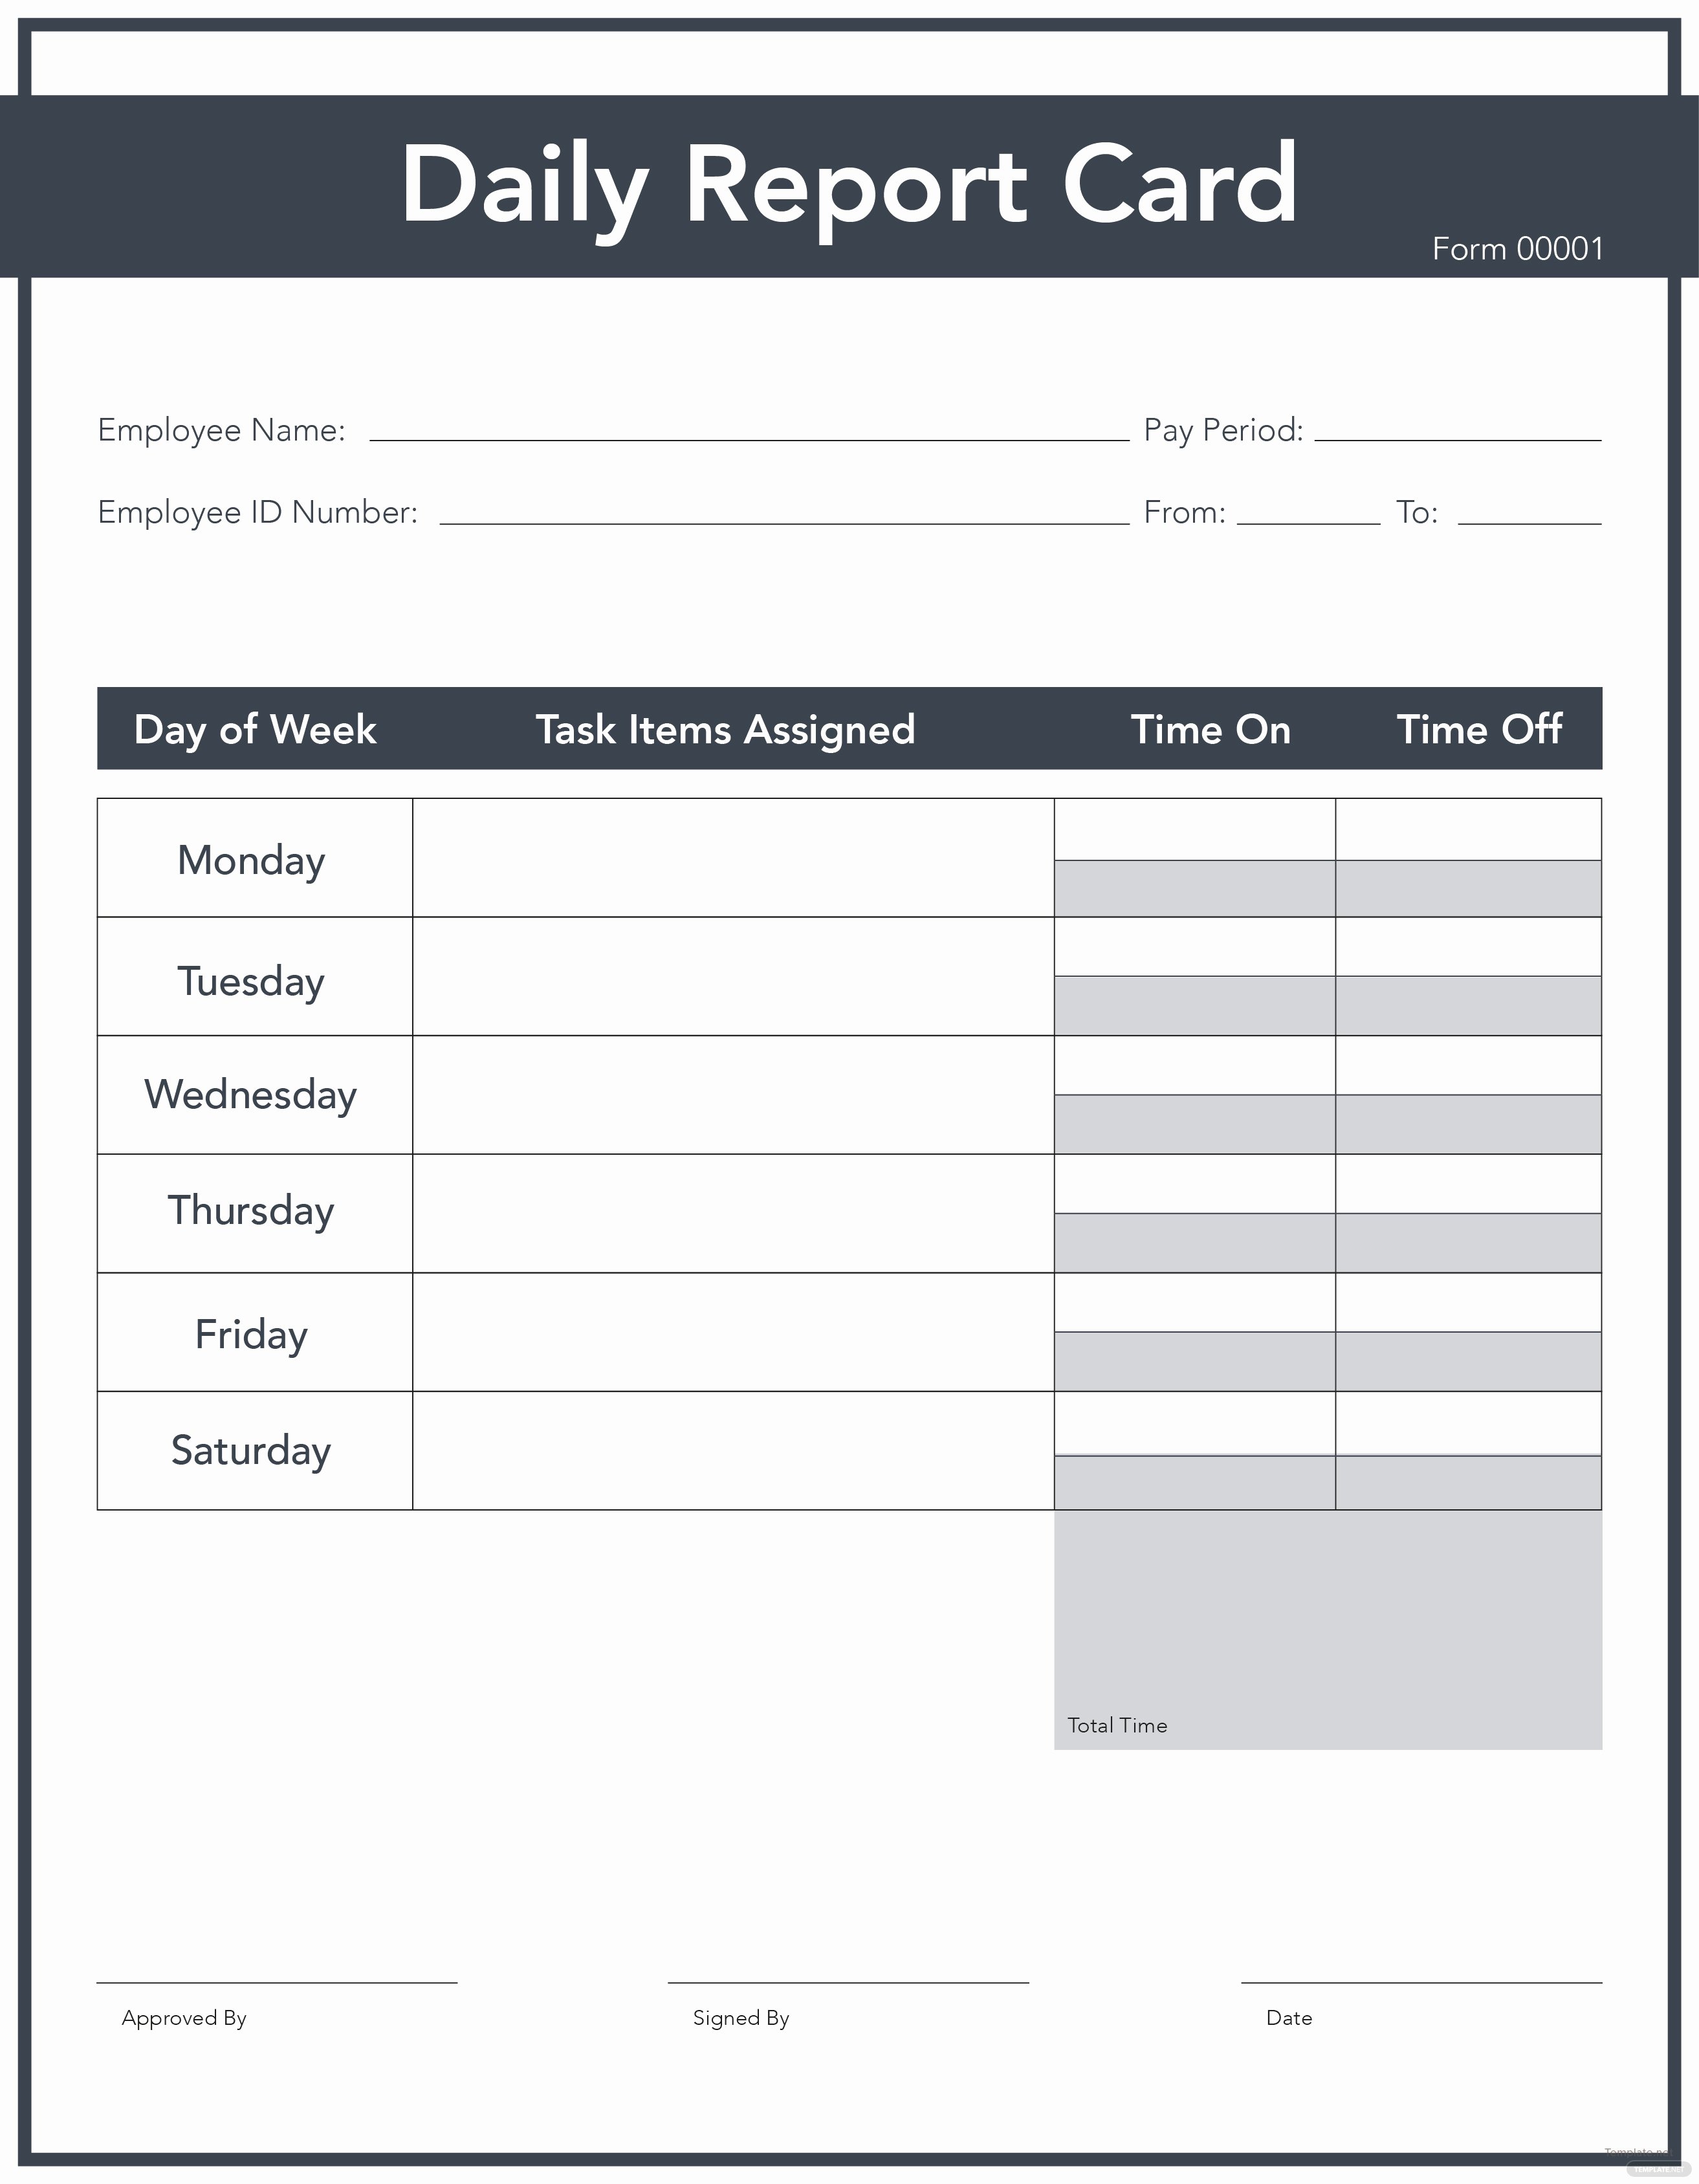 Report Card Templates Free New Free Daily Report Card Template In Adobe Shop Adobe